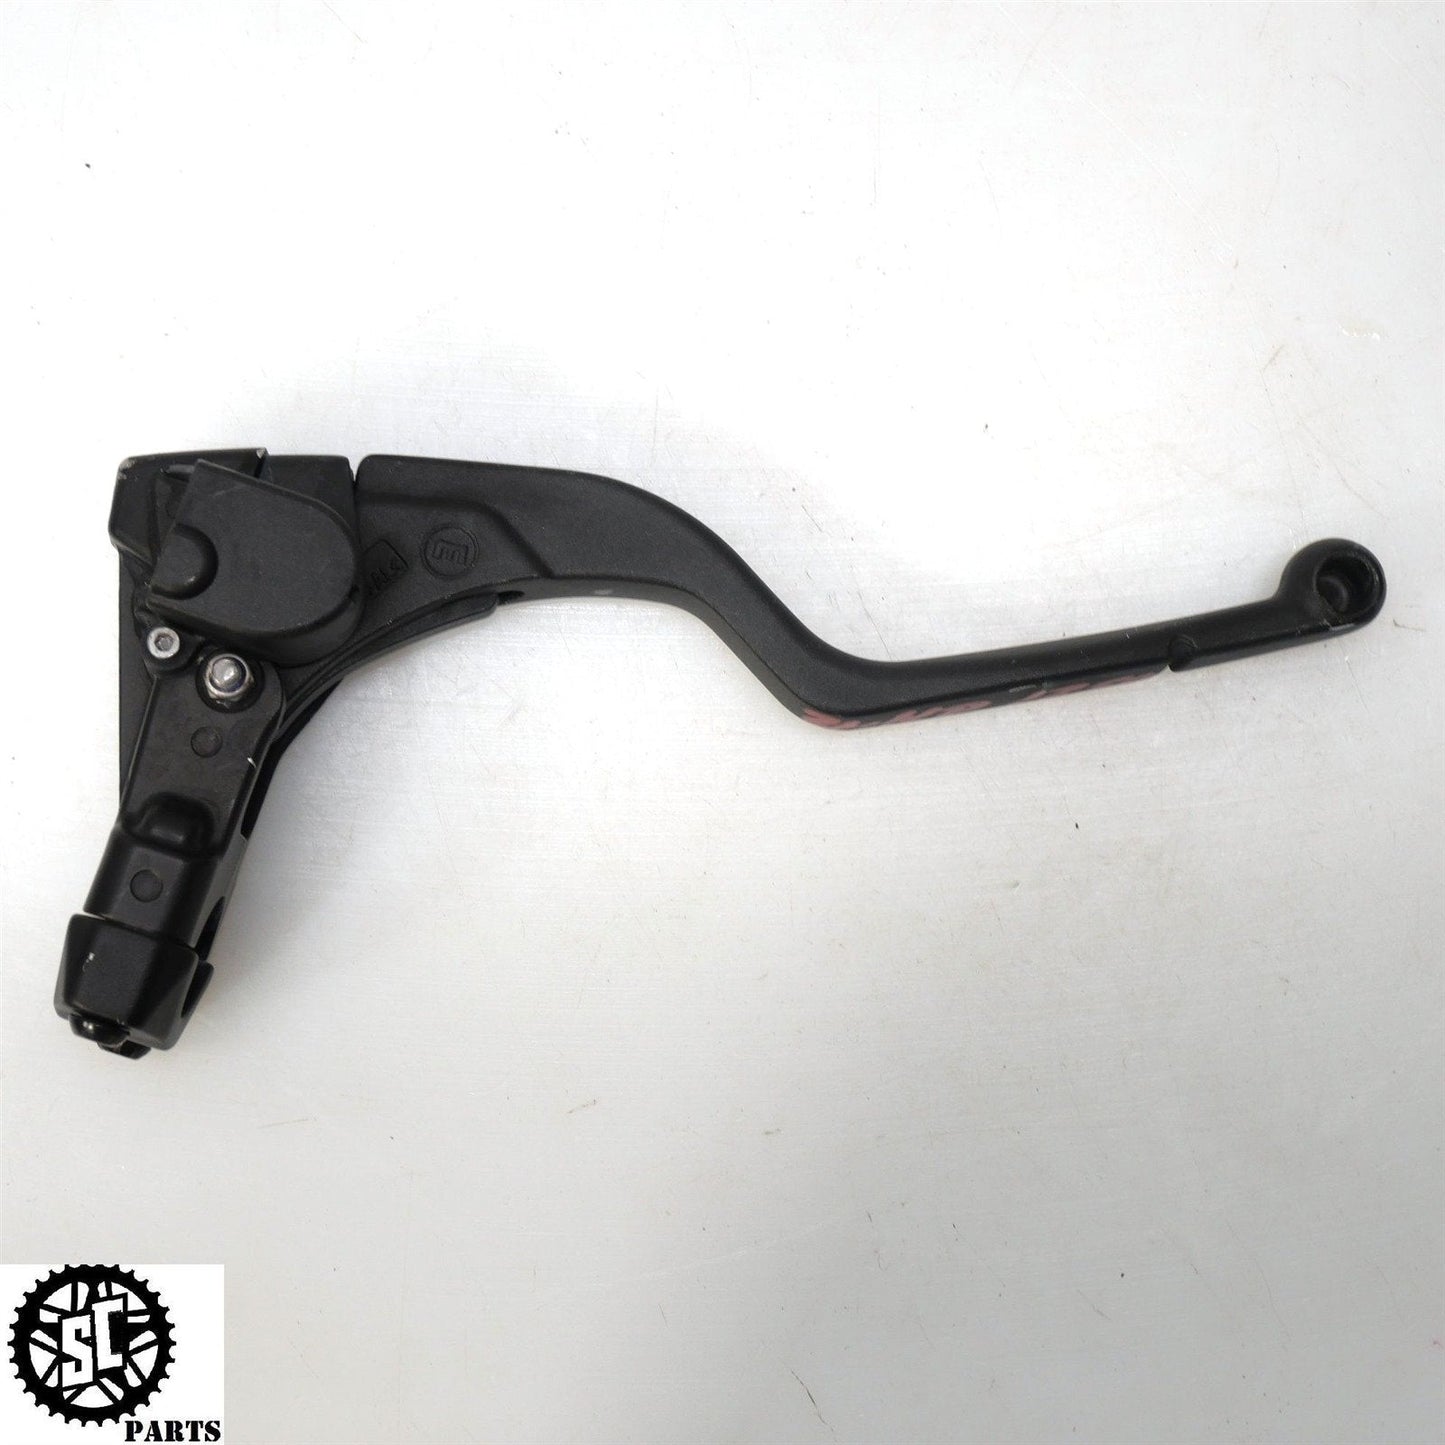 2021-2022 HARLEY SPORTSTER S RH1250 CLUTCH CABLE BRACKET LEVER HD34